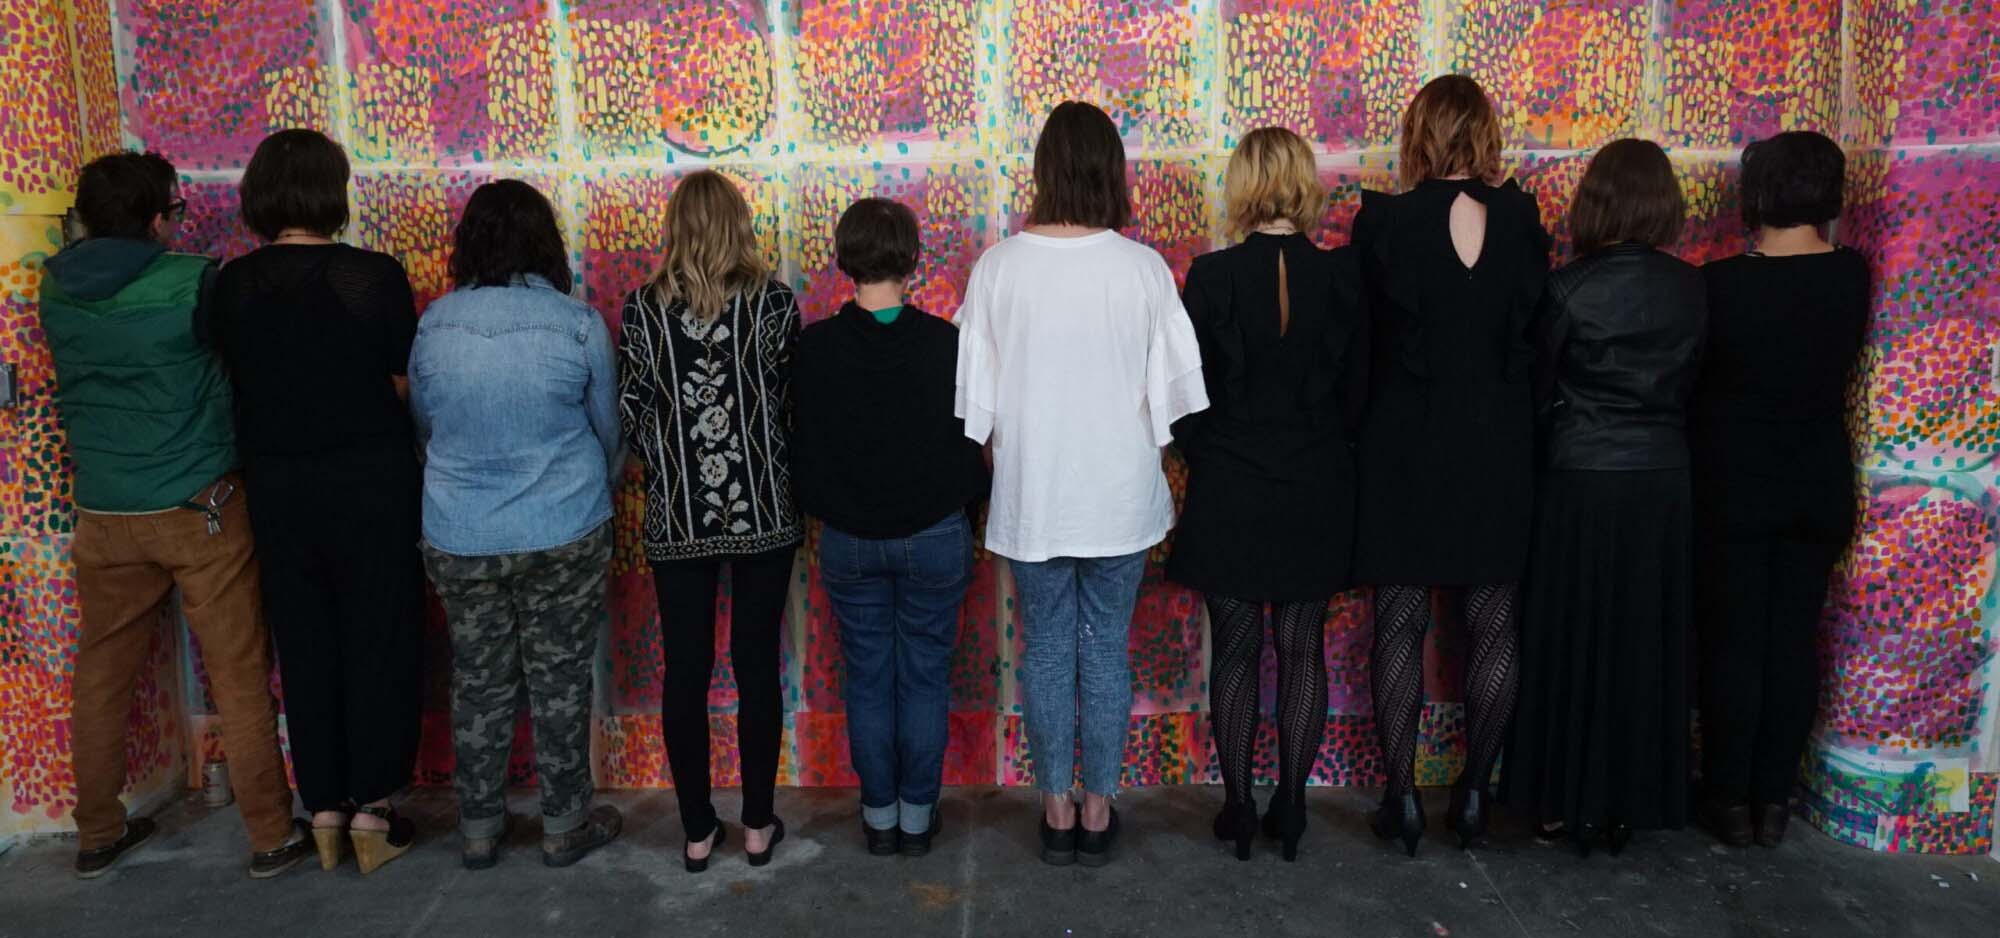 Rear view of a performance art troupe standing together.